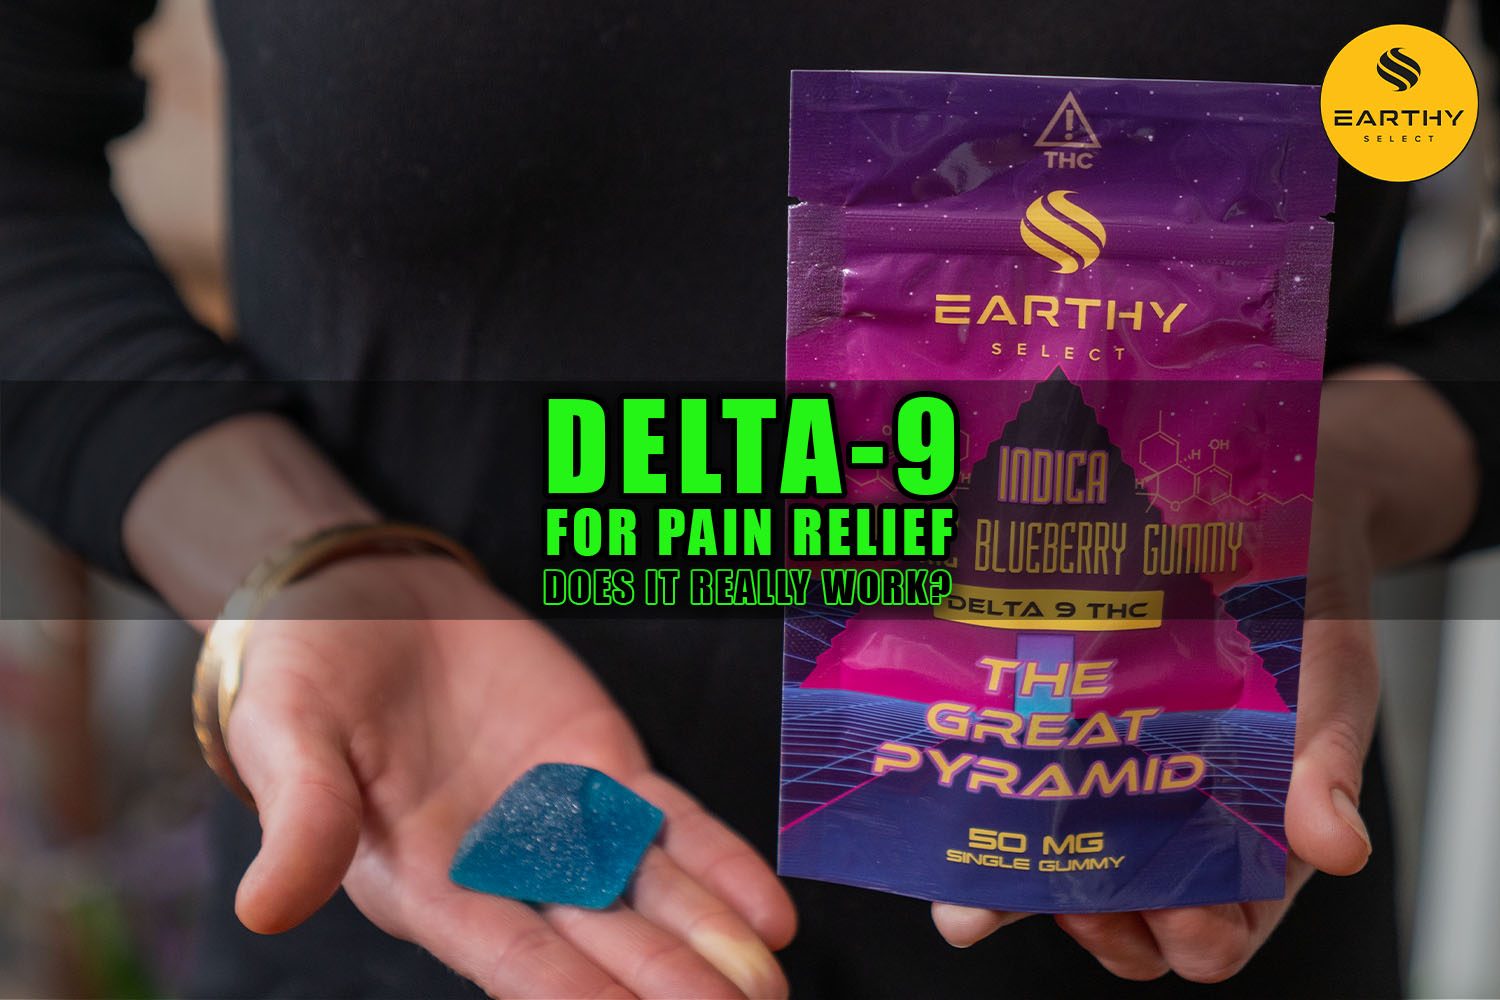 Delta-9 for Pain Relief - Does it really work? Earthy Select